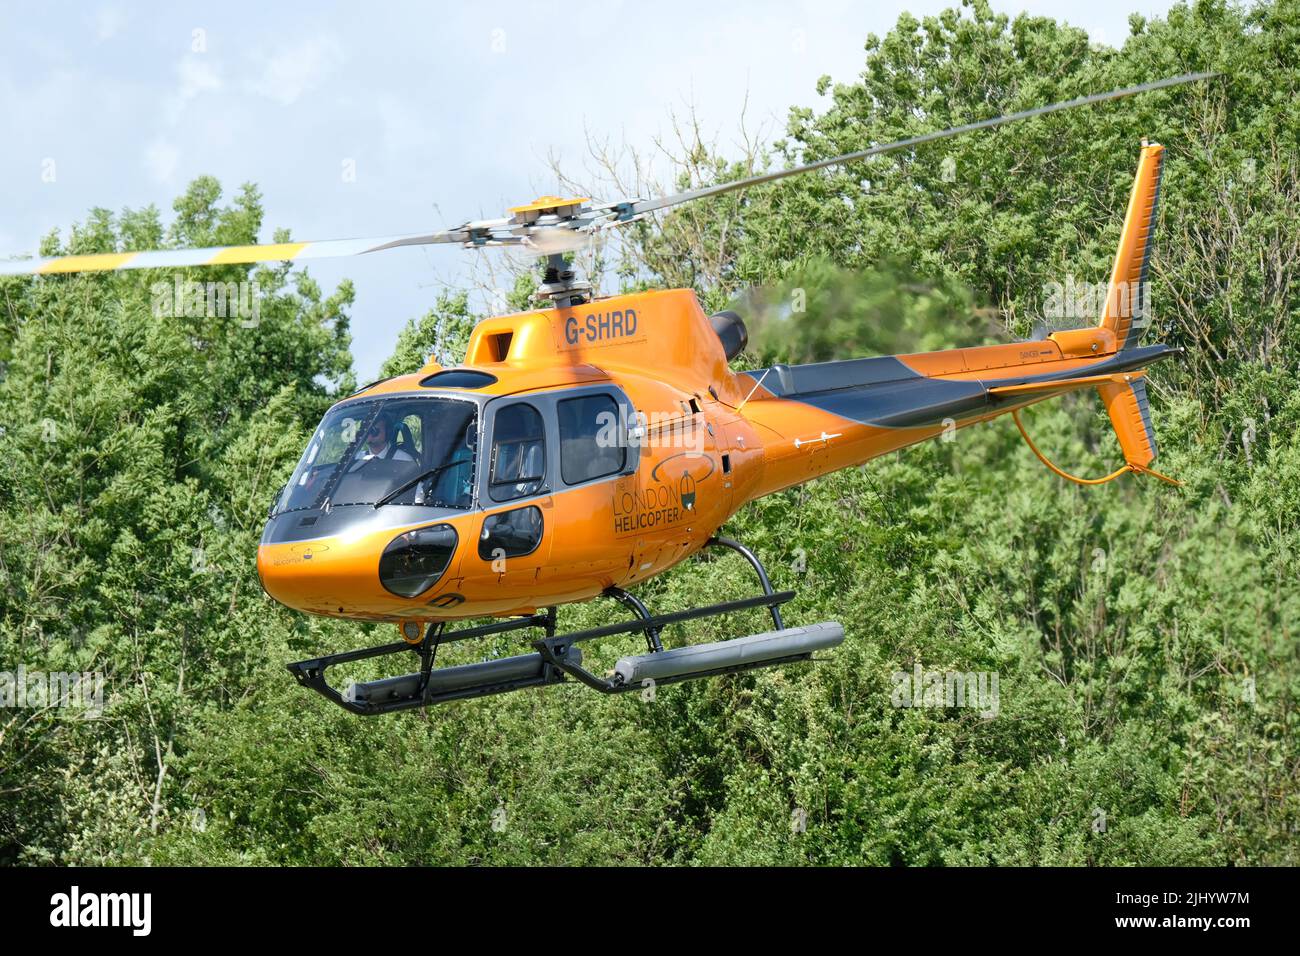 Eurocopter AS 350 Squrrel helicopter taking off operated by London Helicopters registration G-SHRD Stock Photo